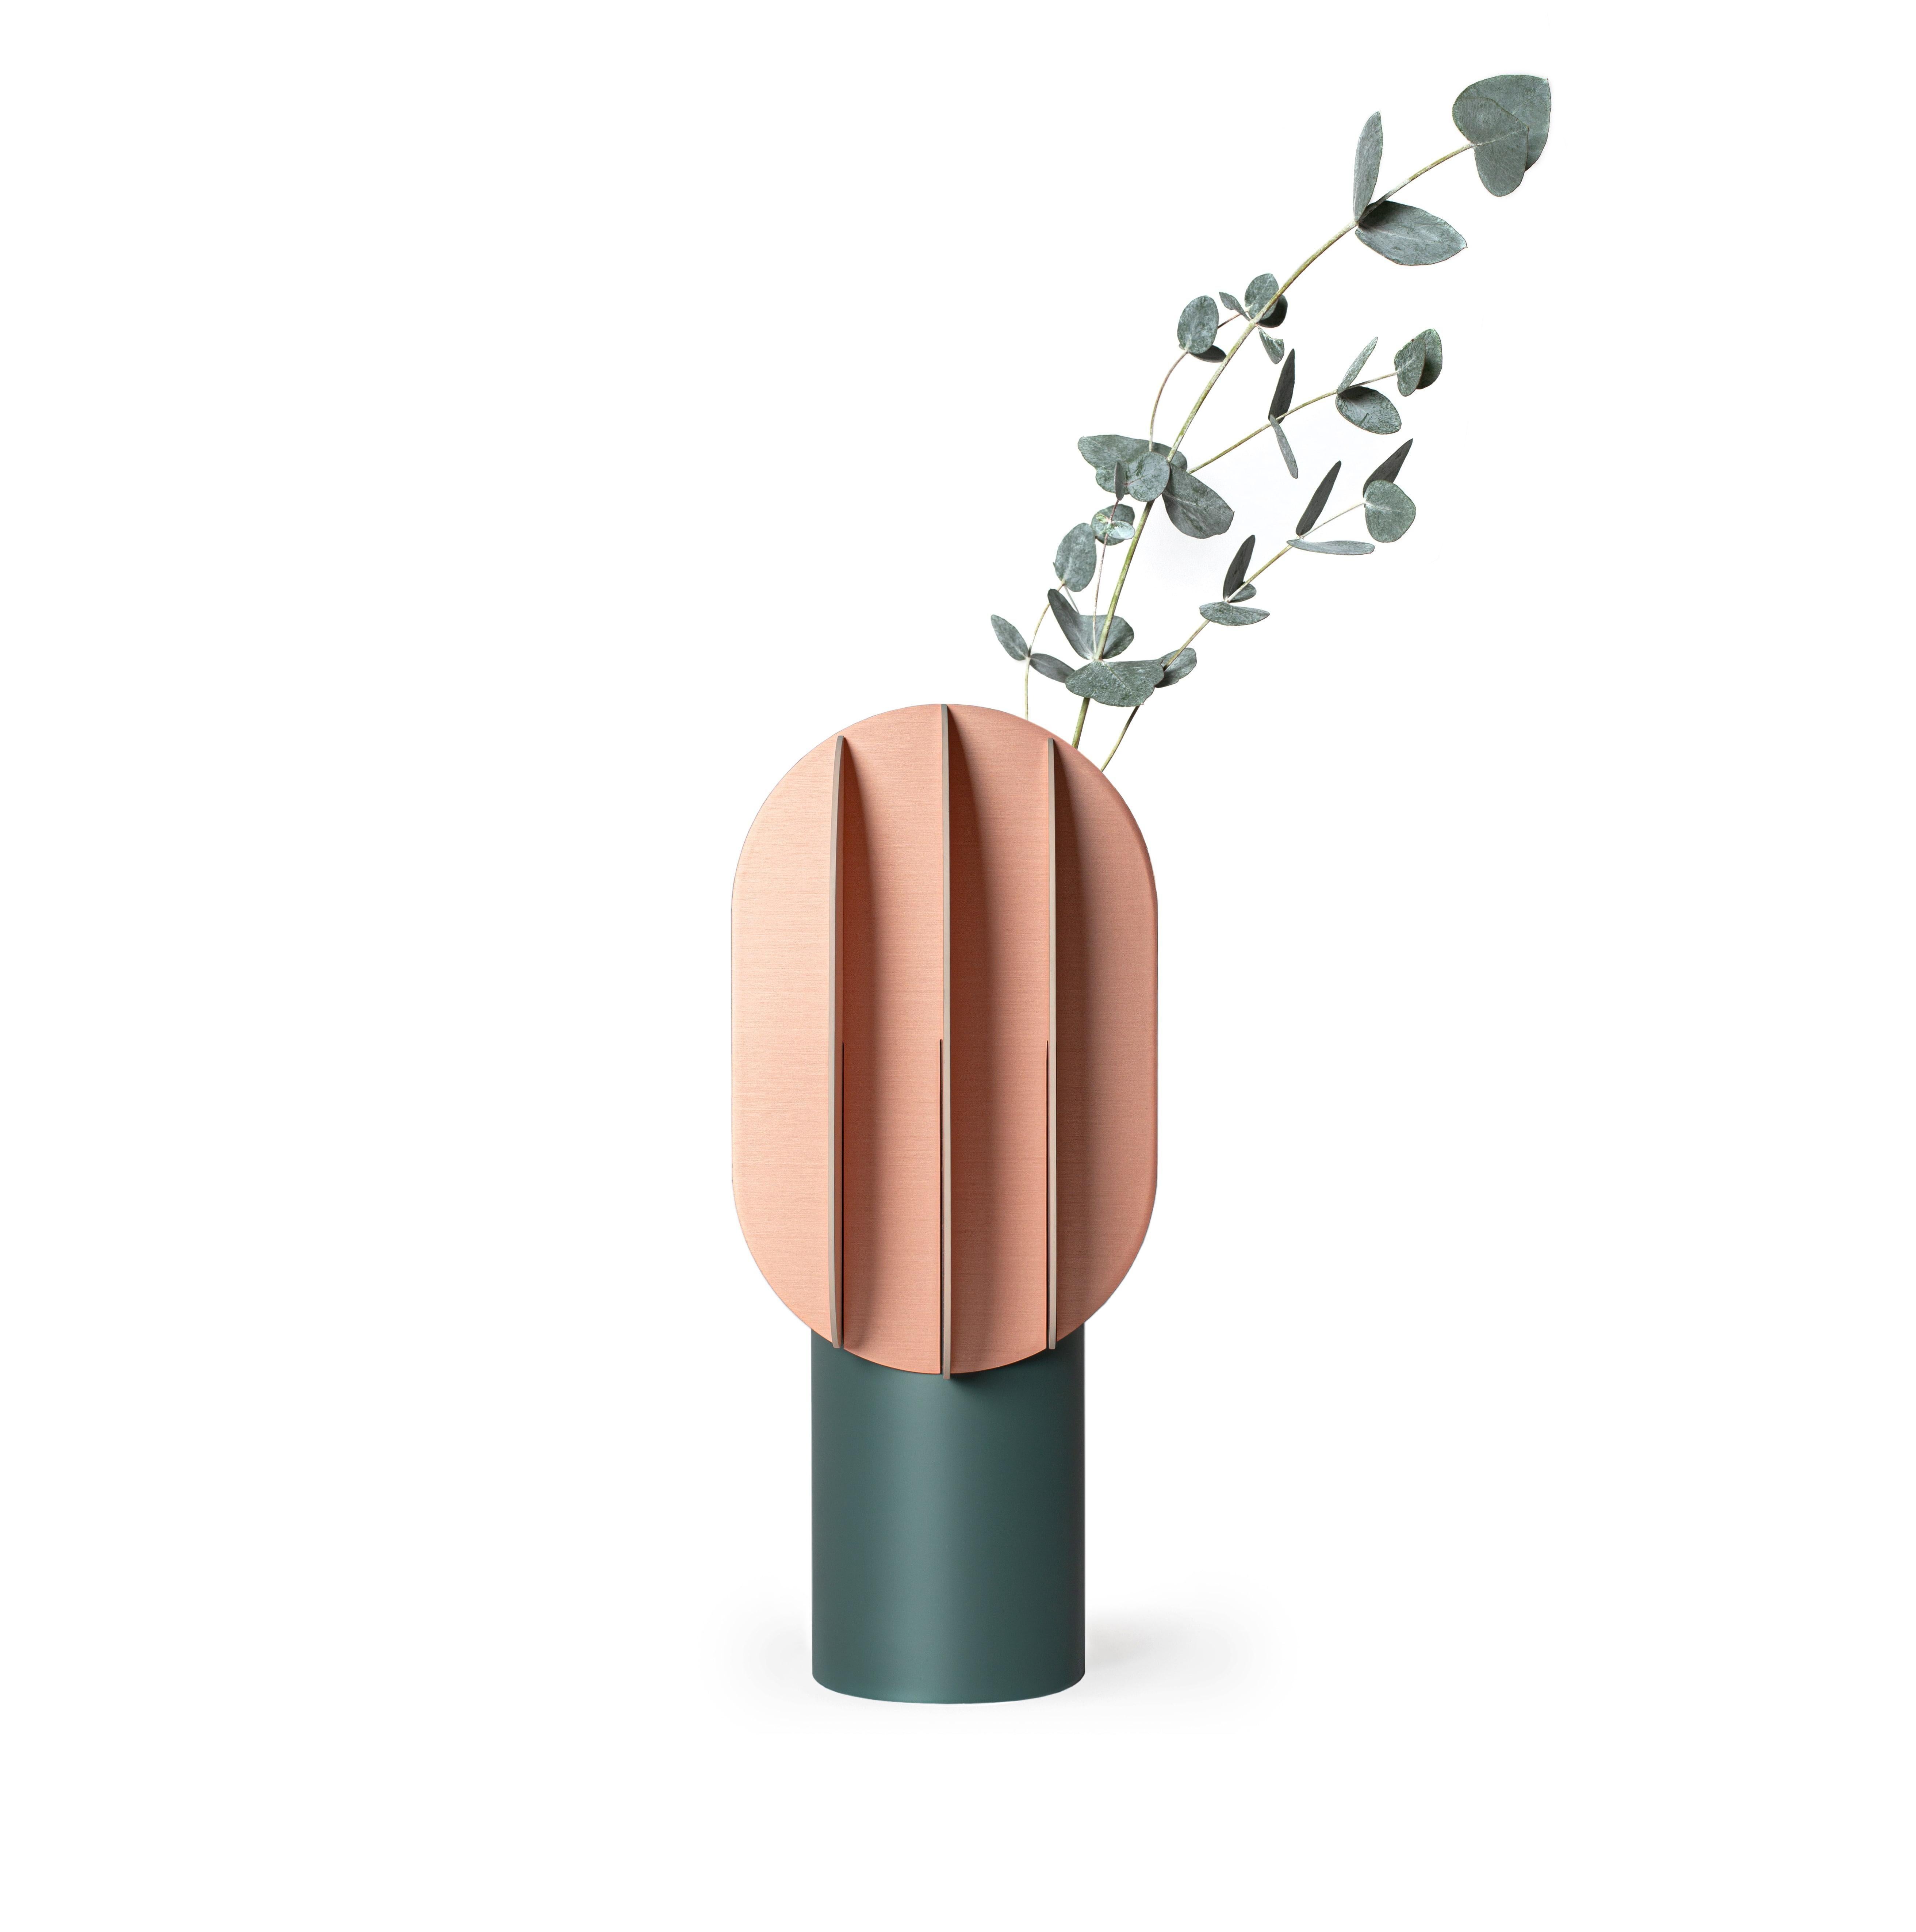 Organic Modern Contemporary Vase 'Gabo CS10' by Noom, Copper and Steel For Sale